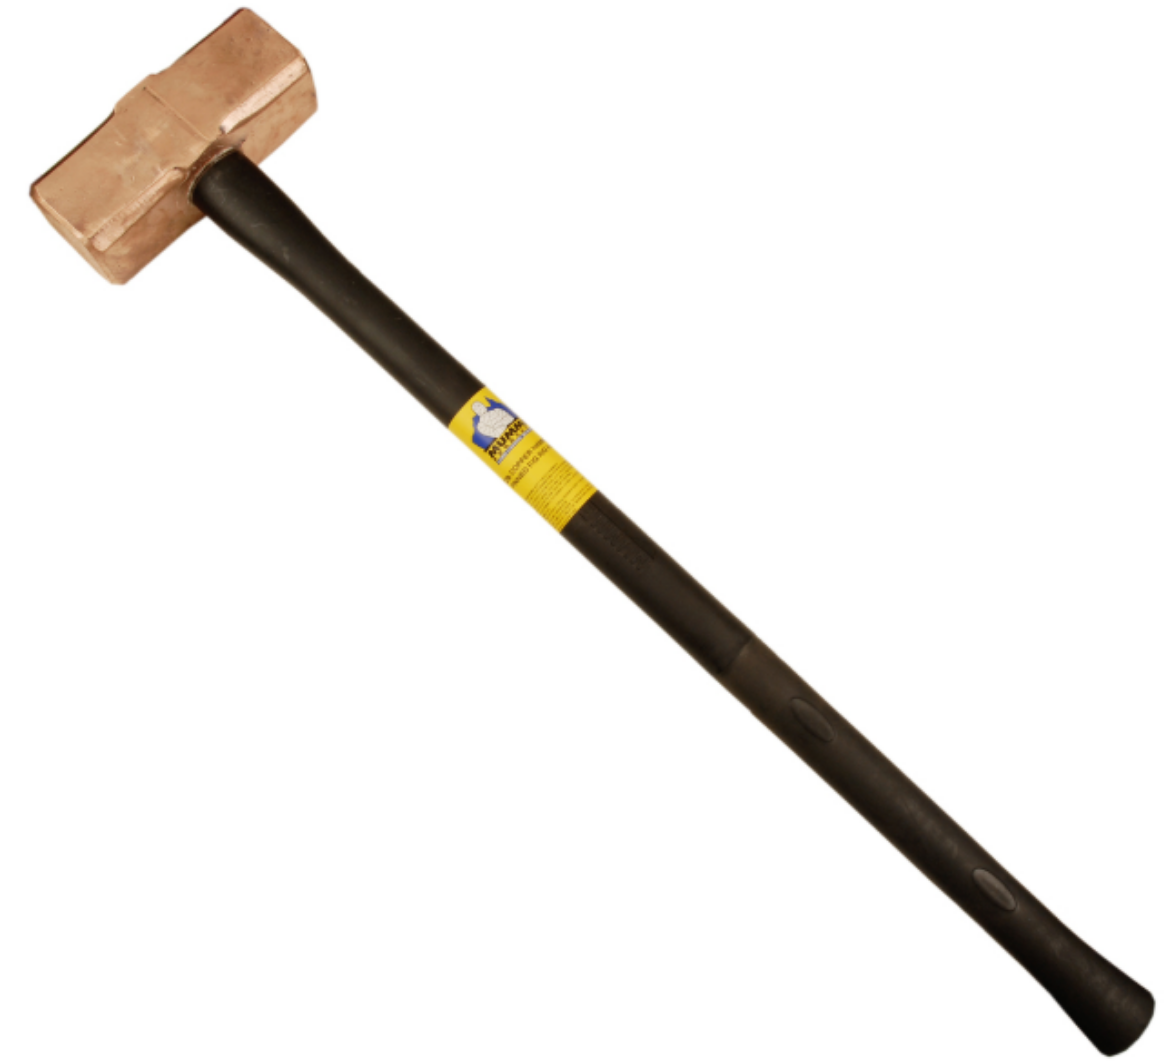 Picture of Copper Sledge Hammer 14lb/6.4kg, Pinned Steel Core Fibreglass Handle 900mm